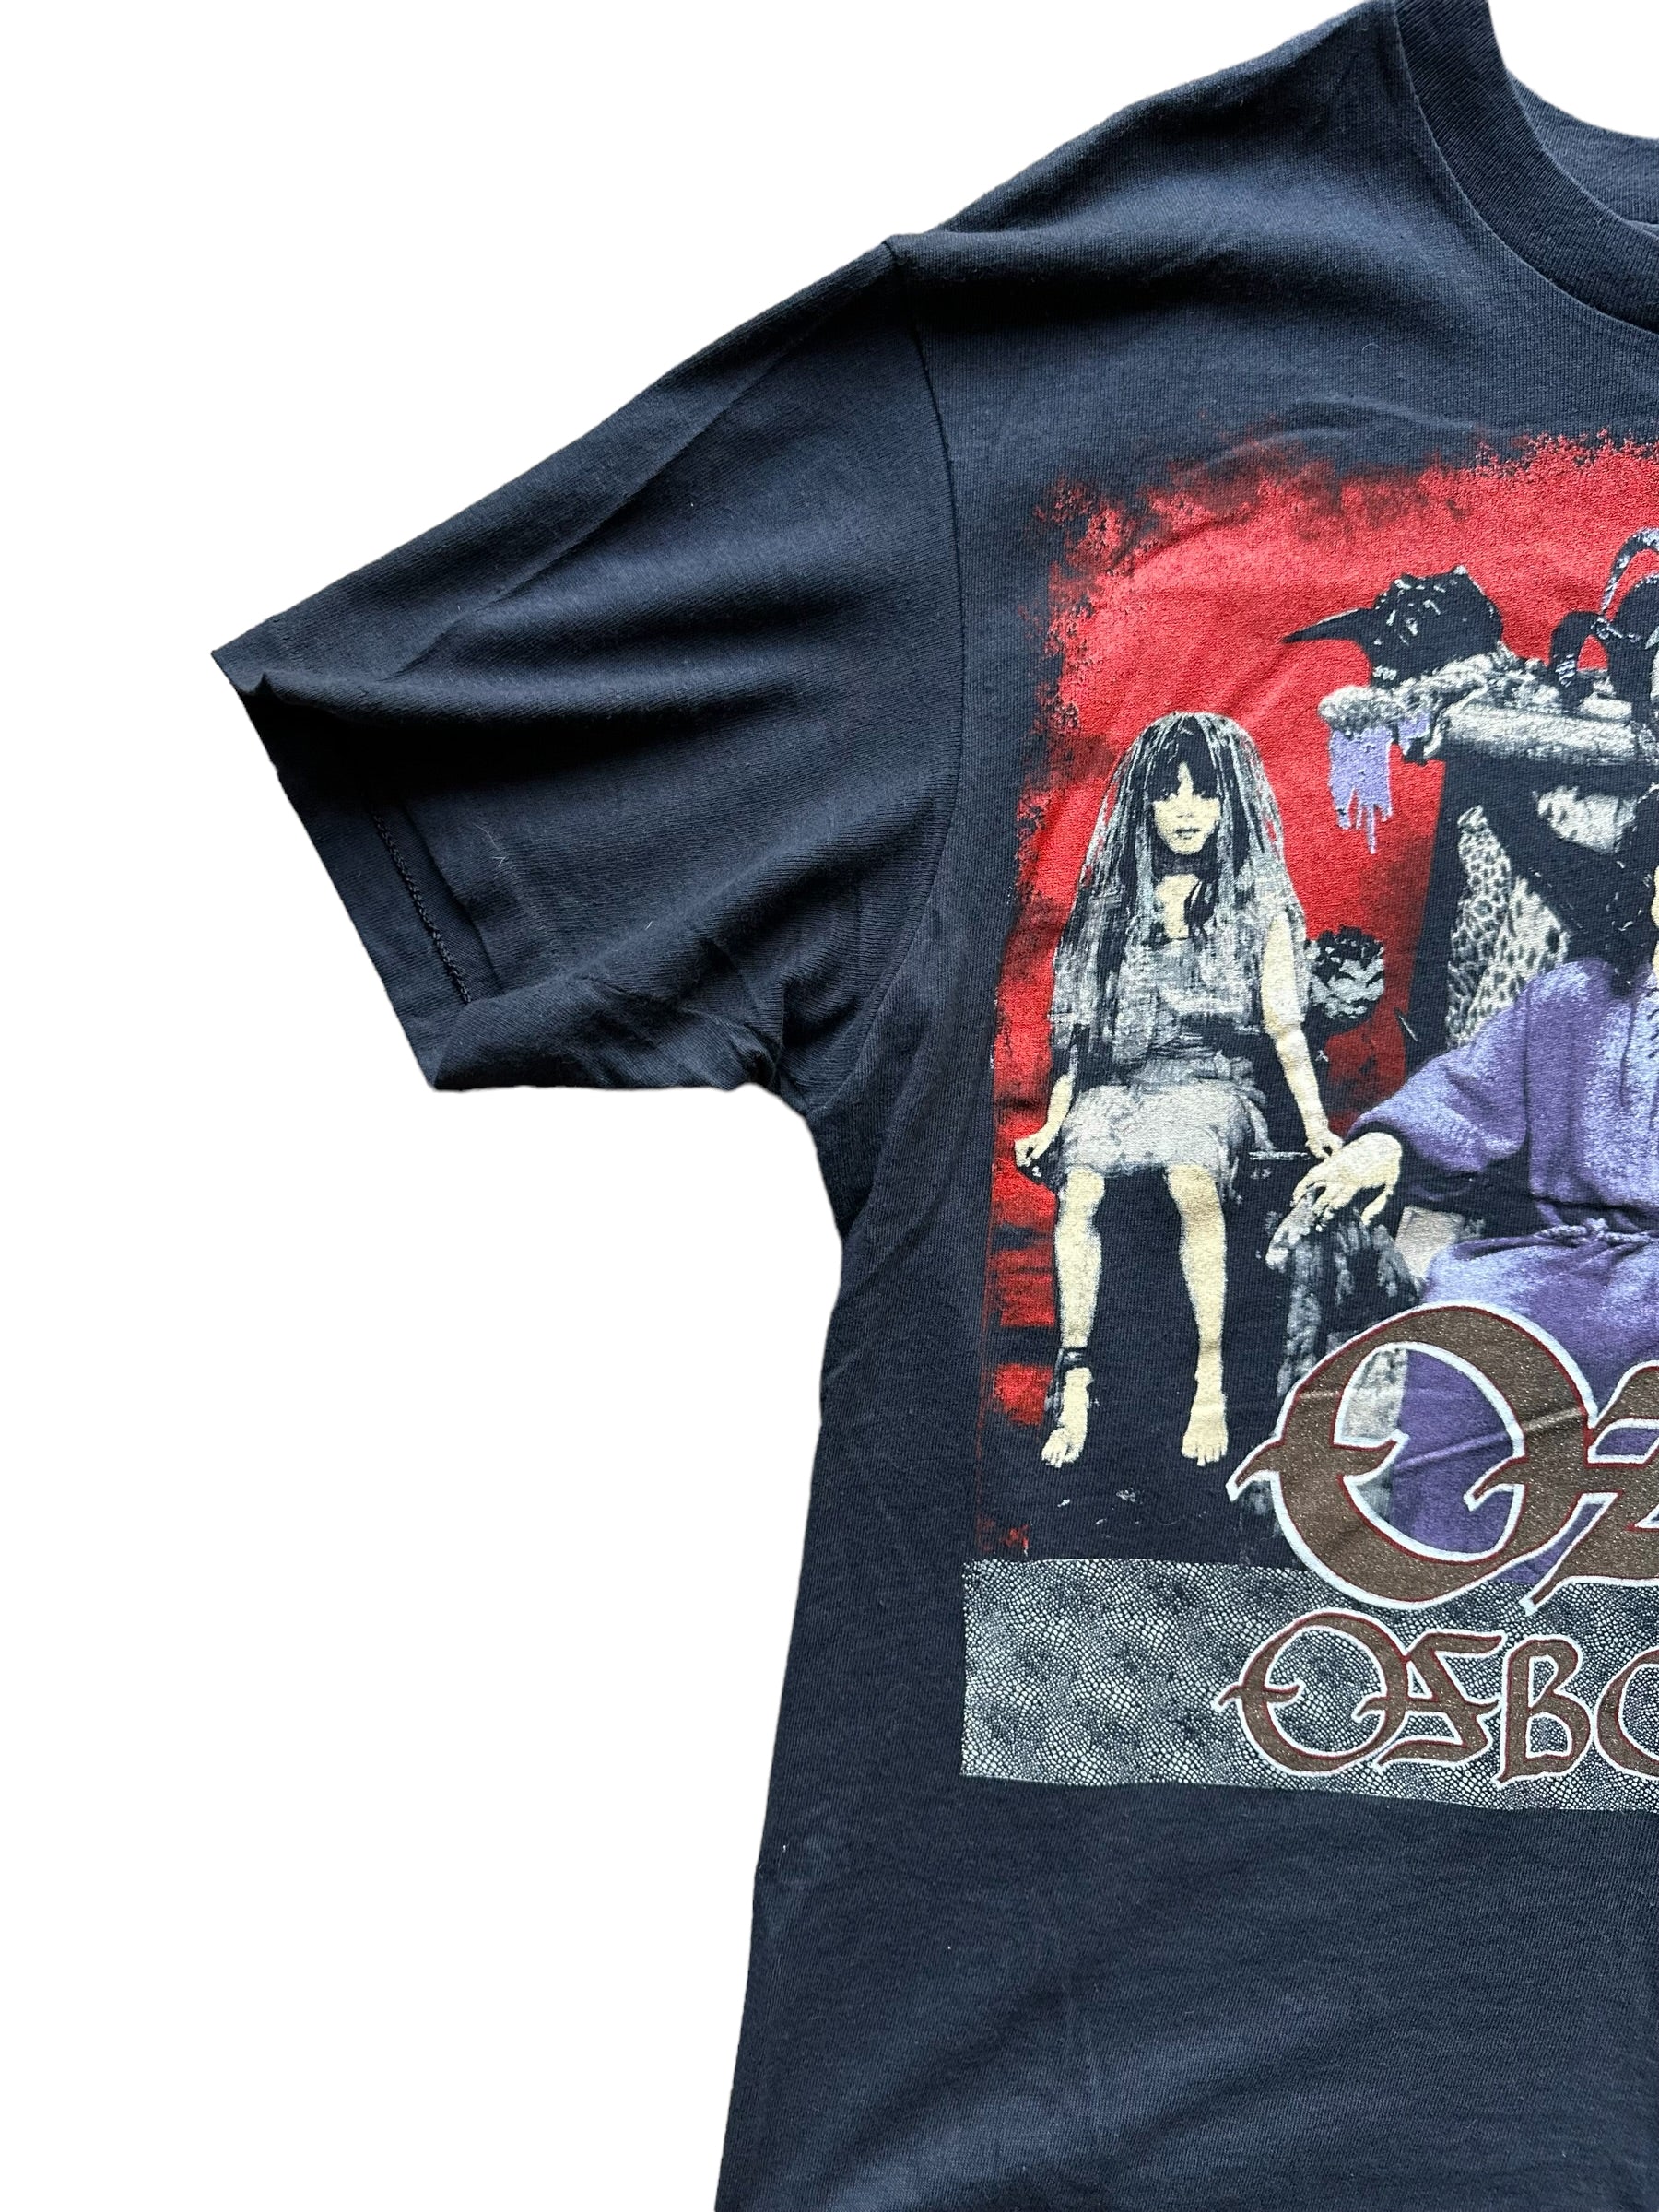 Right Single Stitch Sleeve View on Vintage Ozzy Osbourne No Rest For The Wicked Tour Shirt | Vintage Metal Tee Shirt | Barn Owl Vintage Seattle